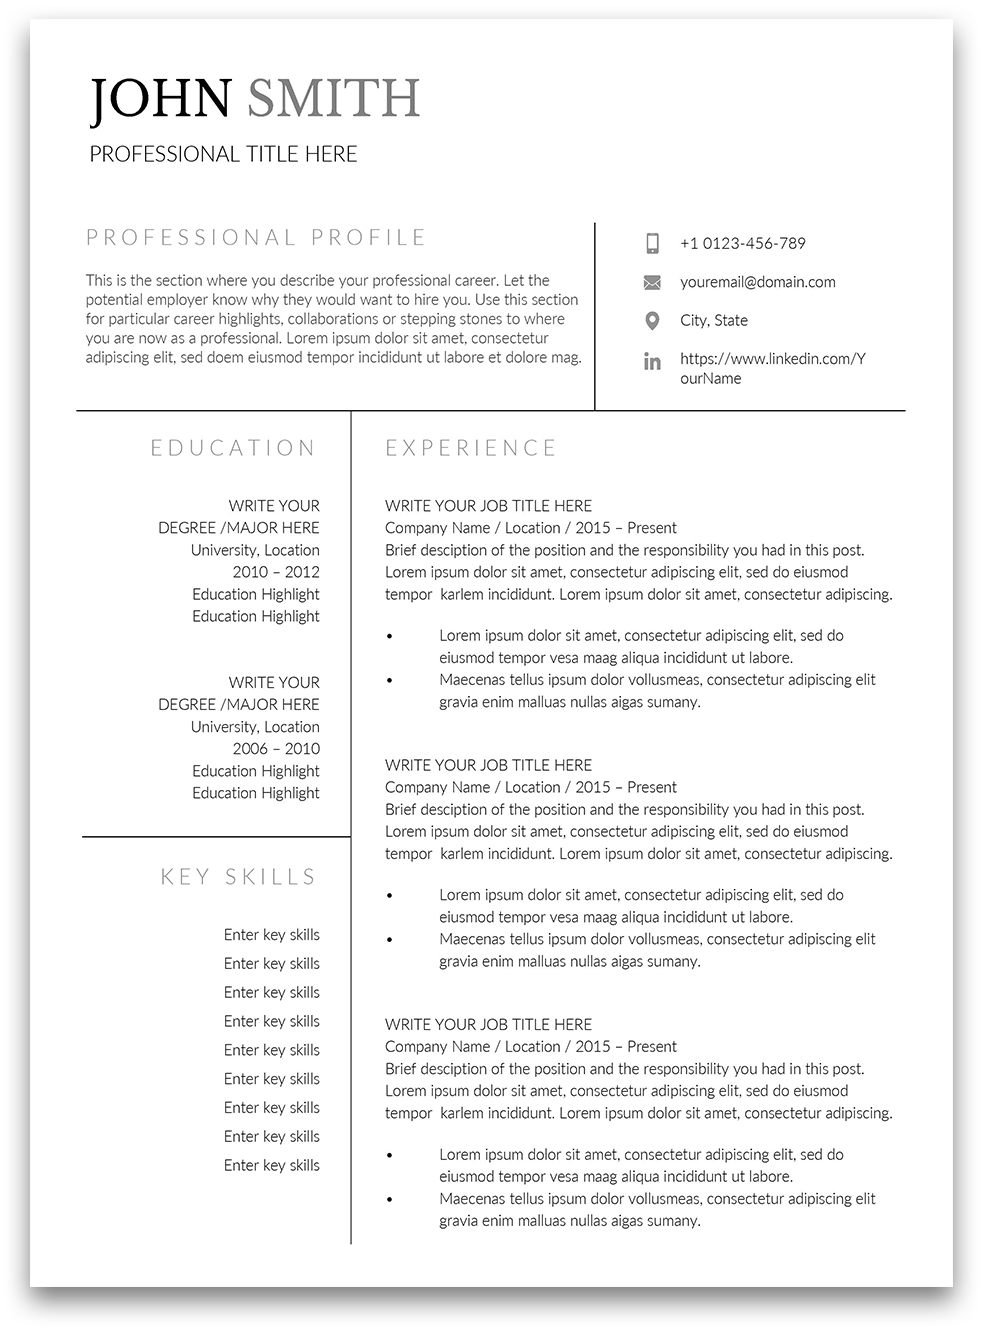 blank one page resume template free download